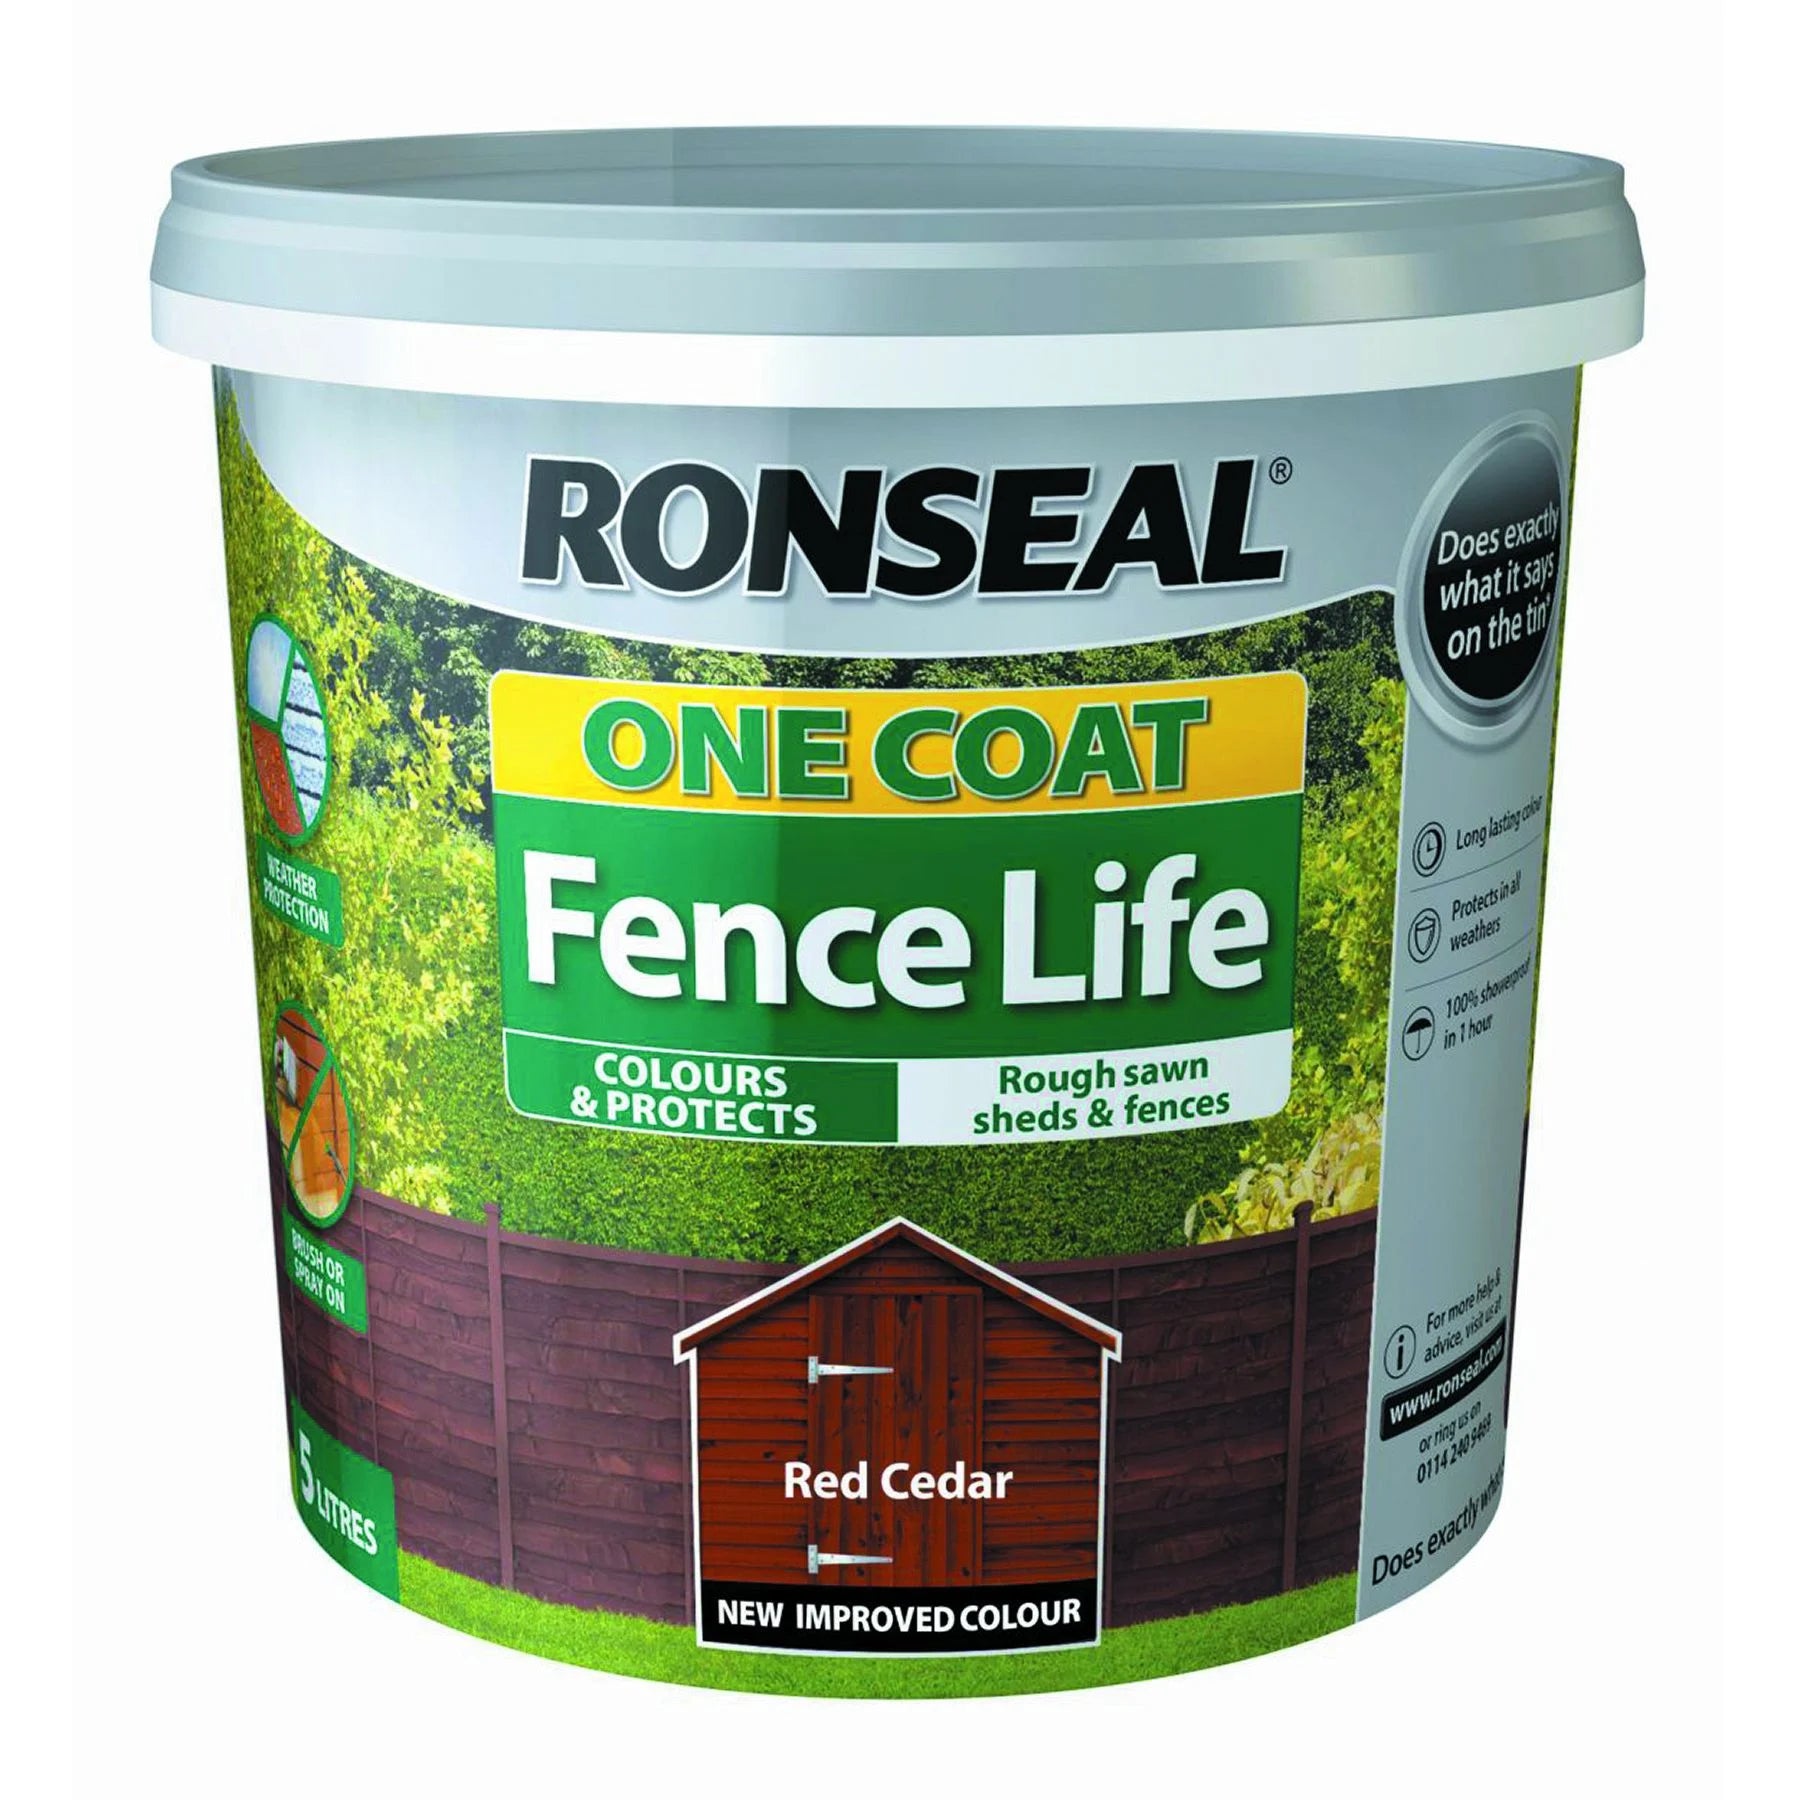 Ronseal One Coat Fence Life 5L - Red Cedar